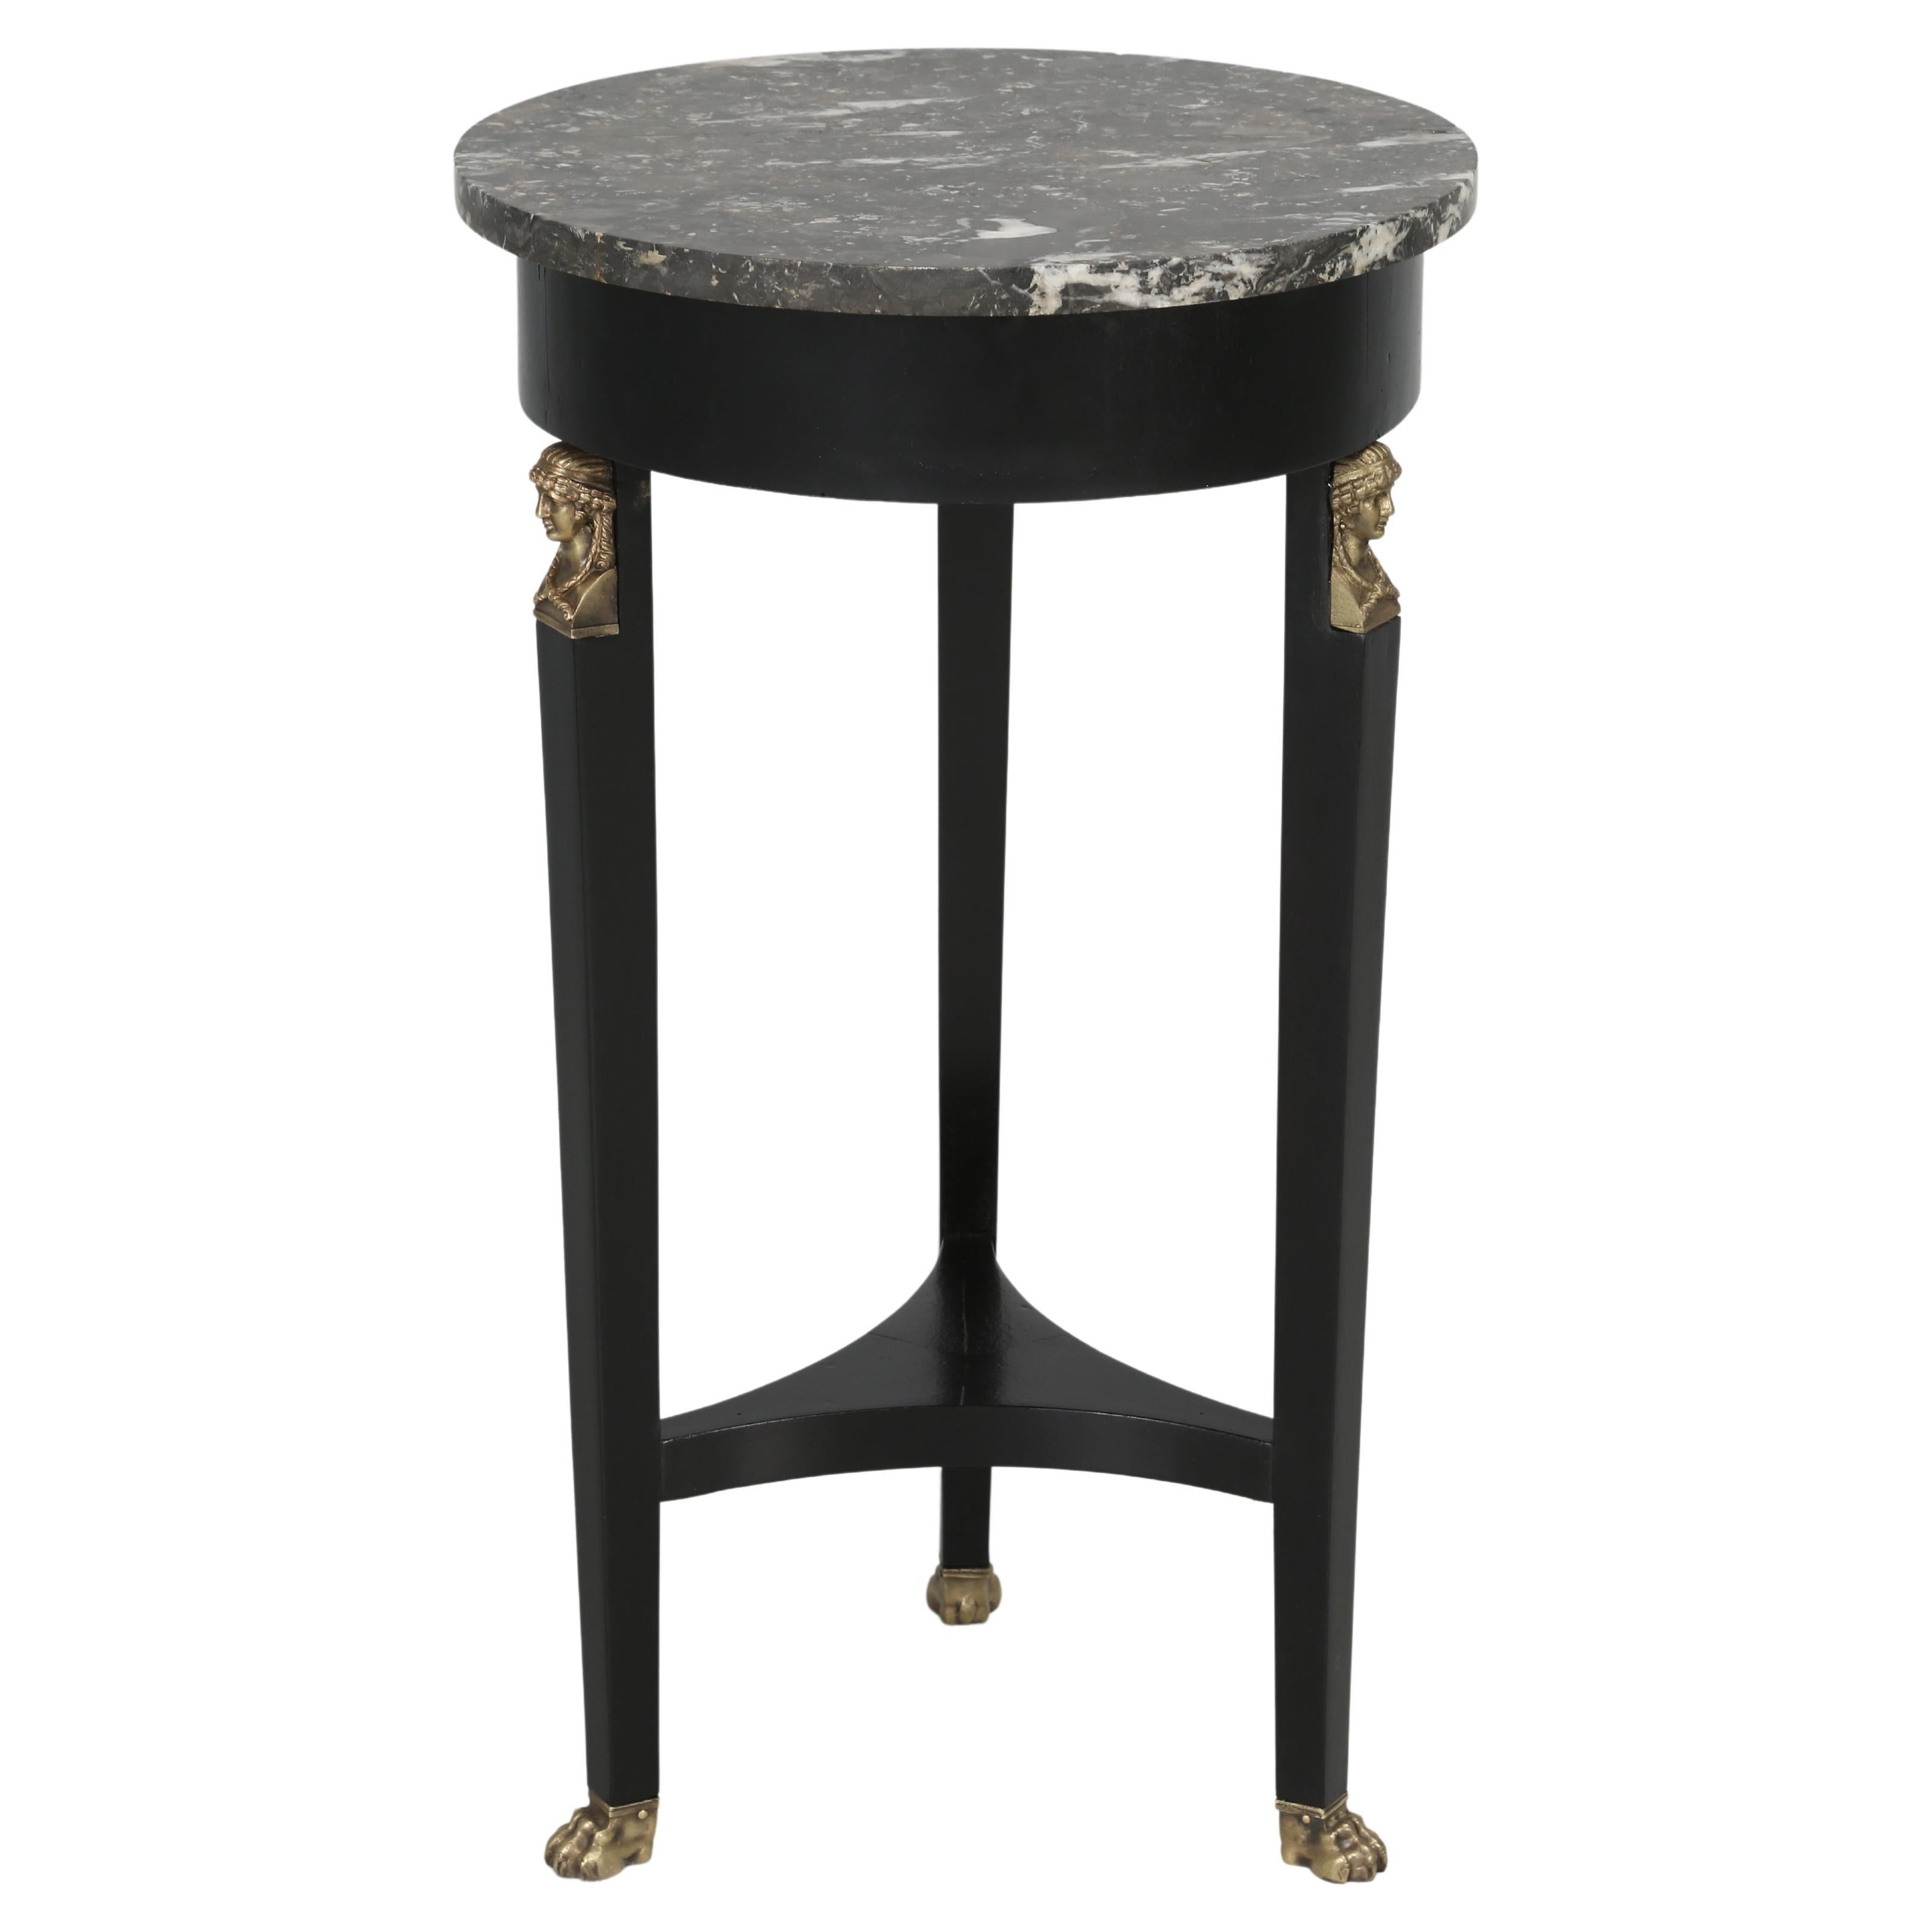 Antique French Empire Style Ebonized Mahogany Round Table with Marble Top For Sale